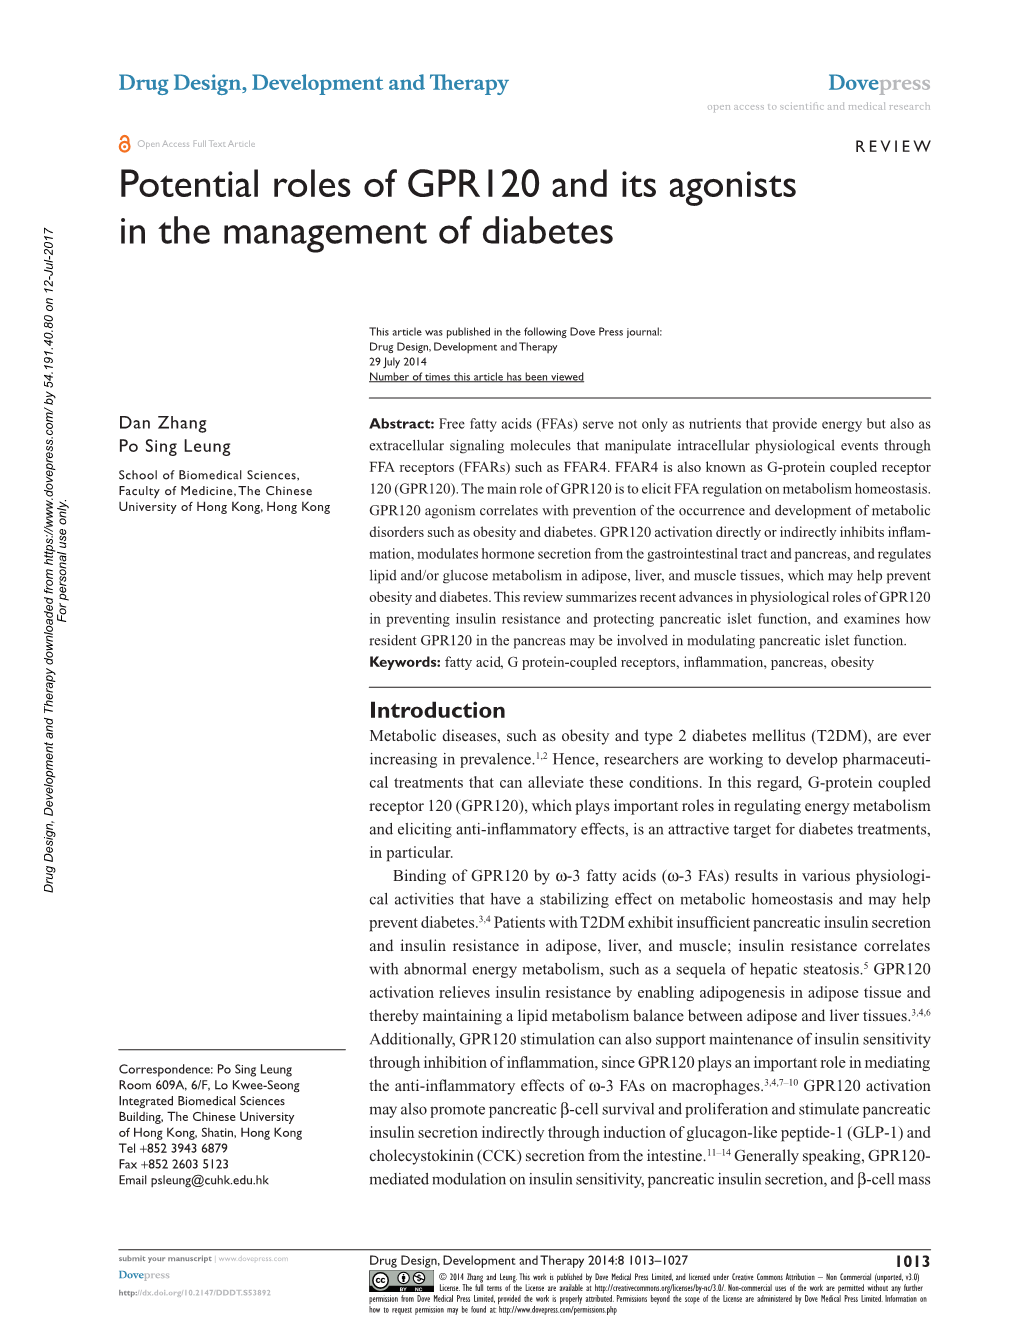 Potential Roles of GPR120 and Its Agonists in the Management of Diabetes